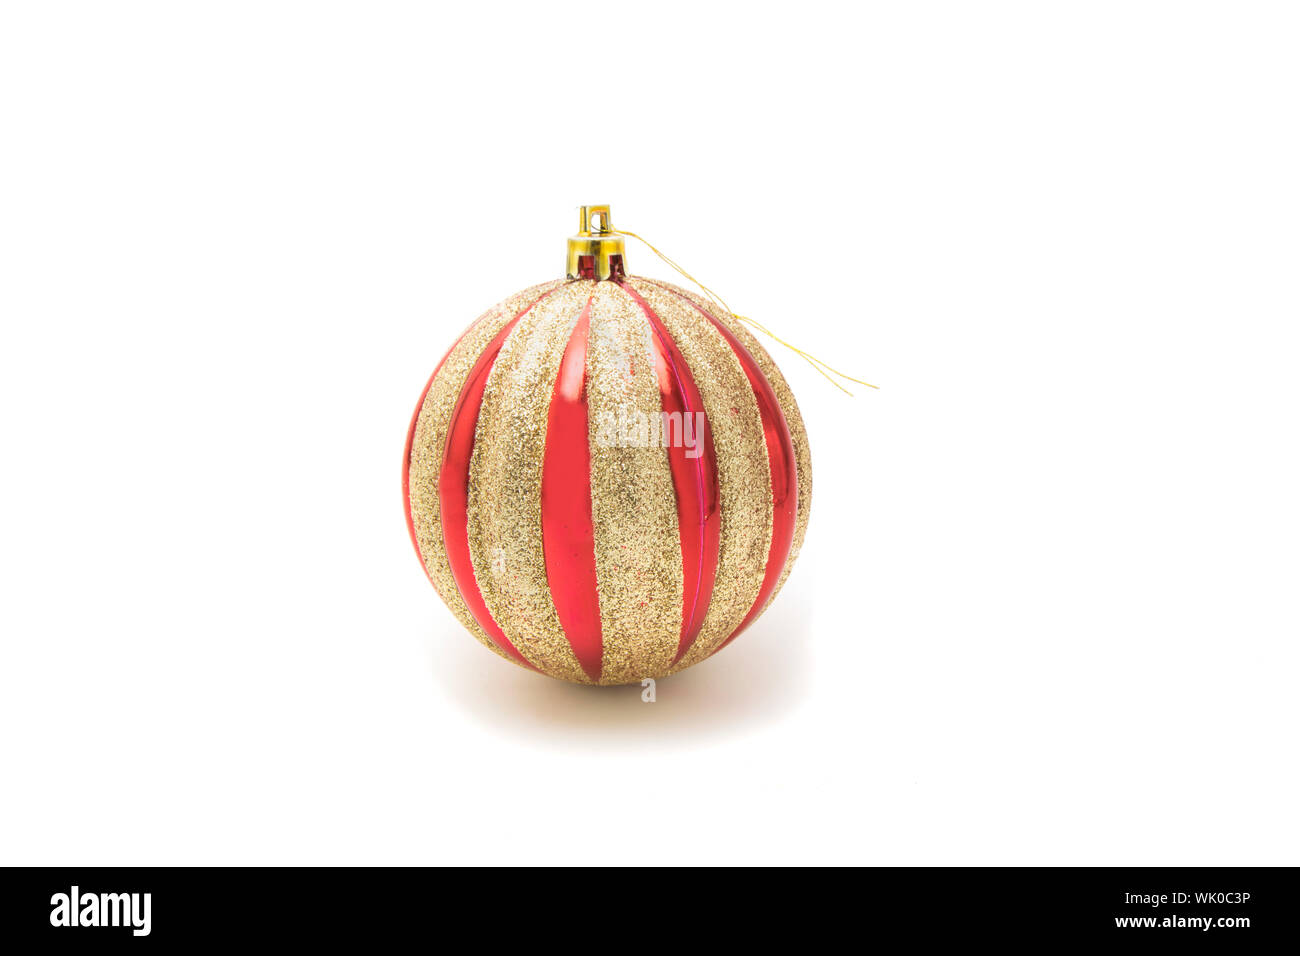 Close-up of Bauble Over White Background Banque D'Images